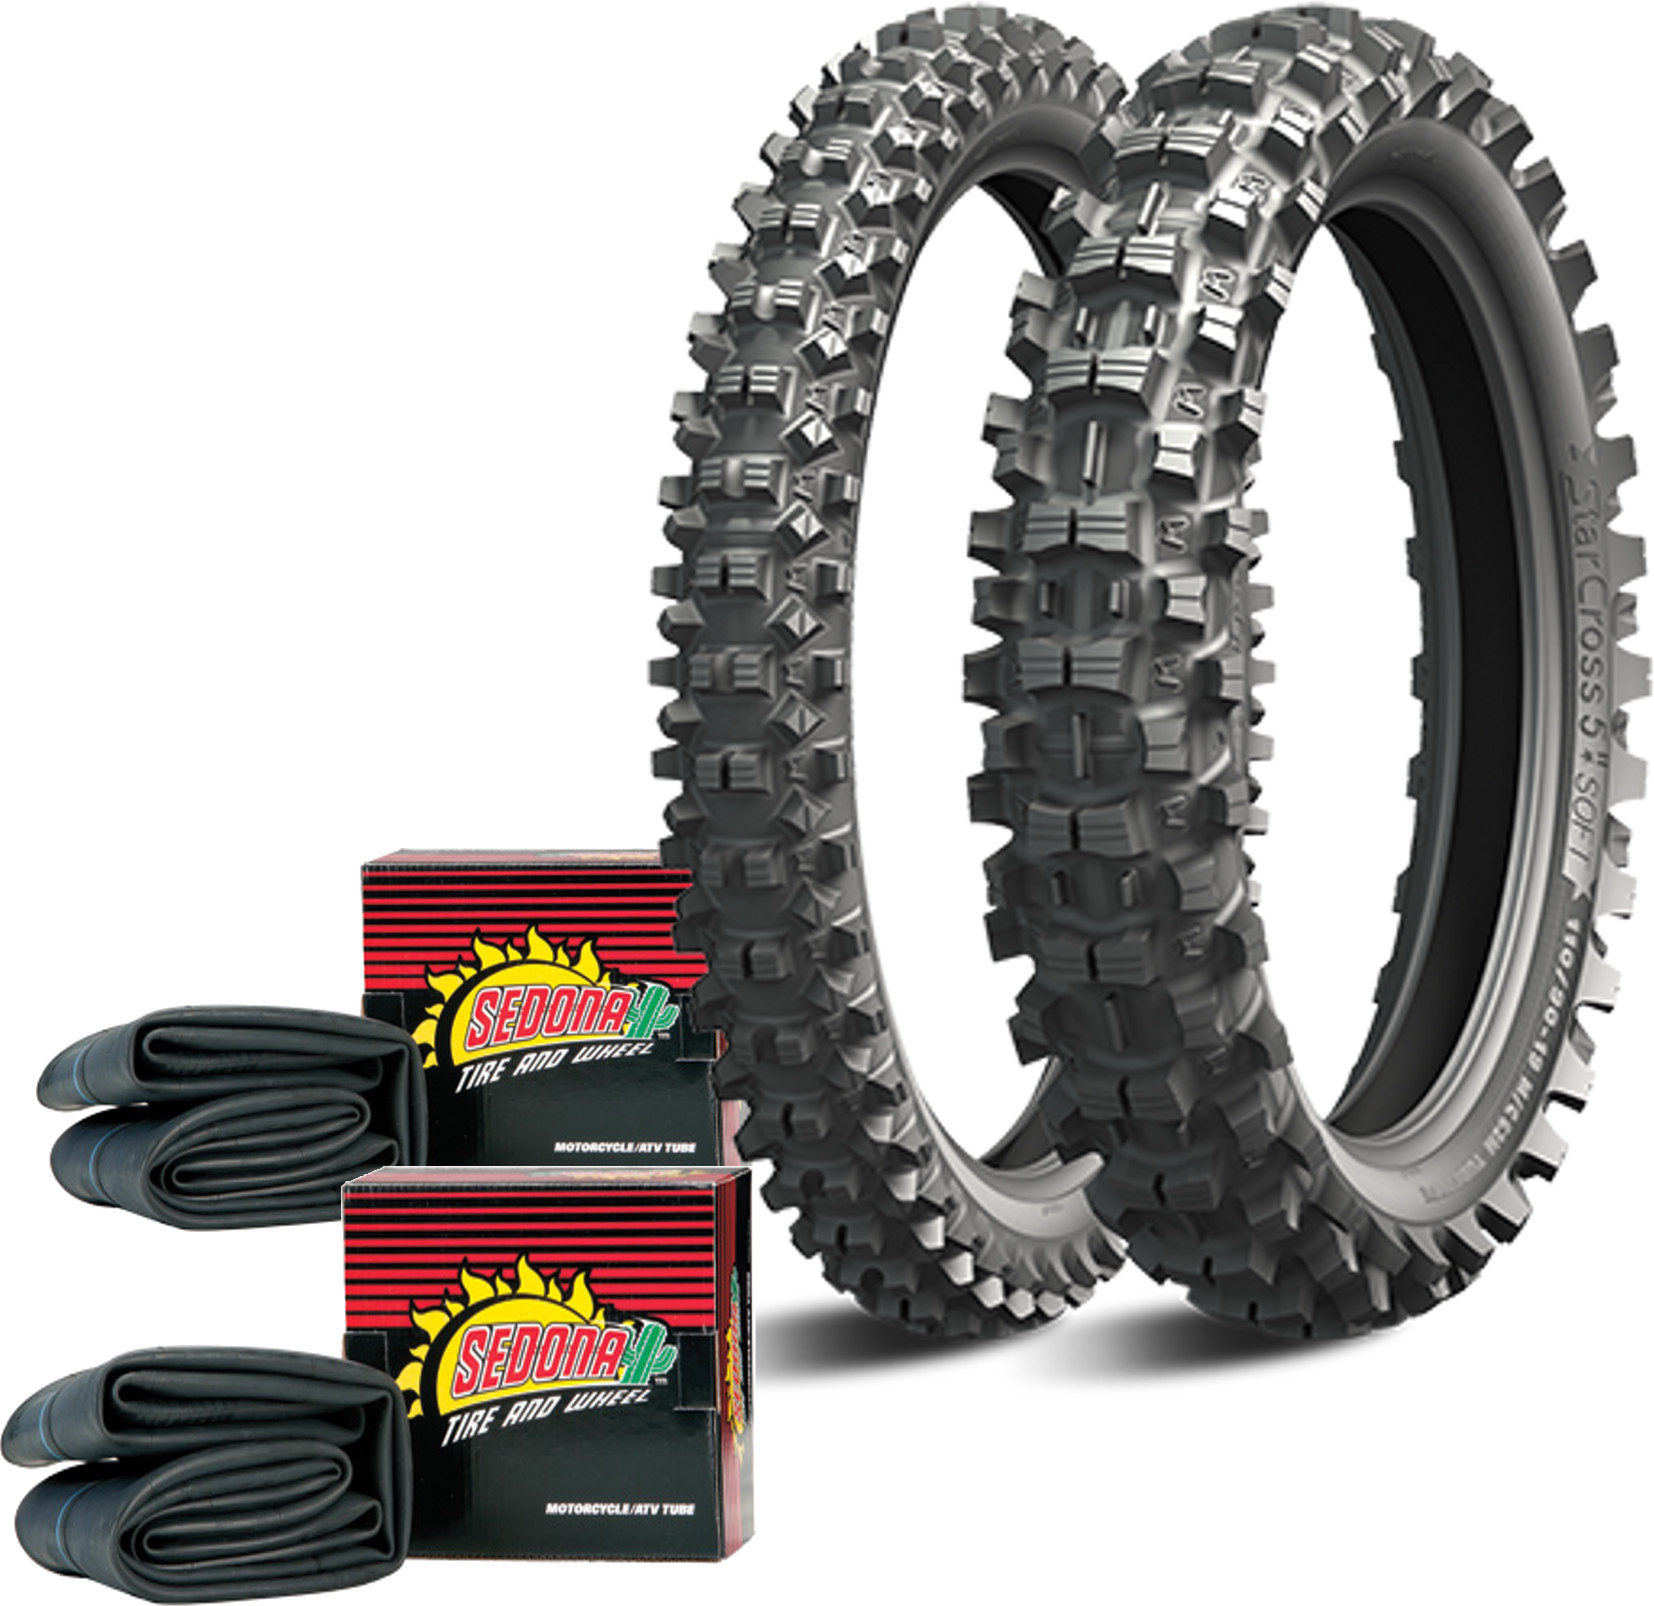 Starcross 5 Soft 120/90-18 90/100-21 - Dirt Tire Kit w/ Tubes - Click Image to Close